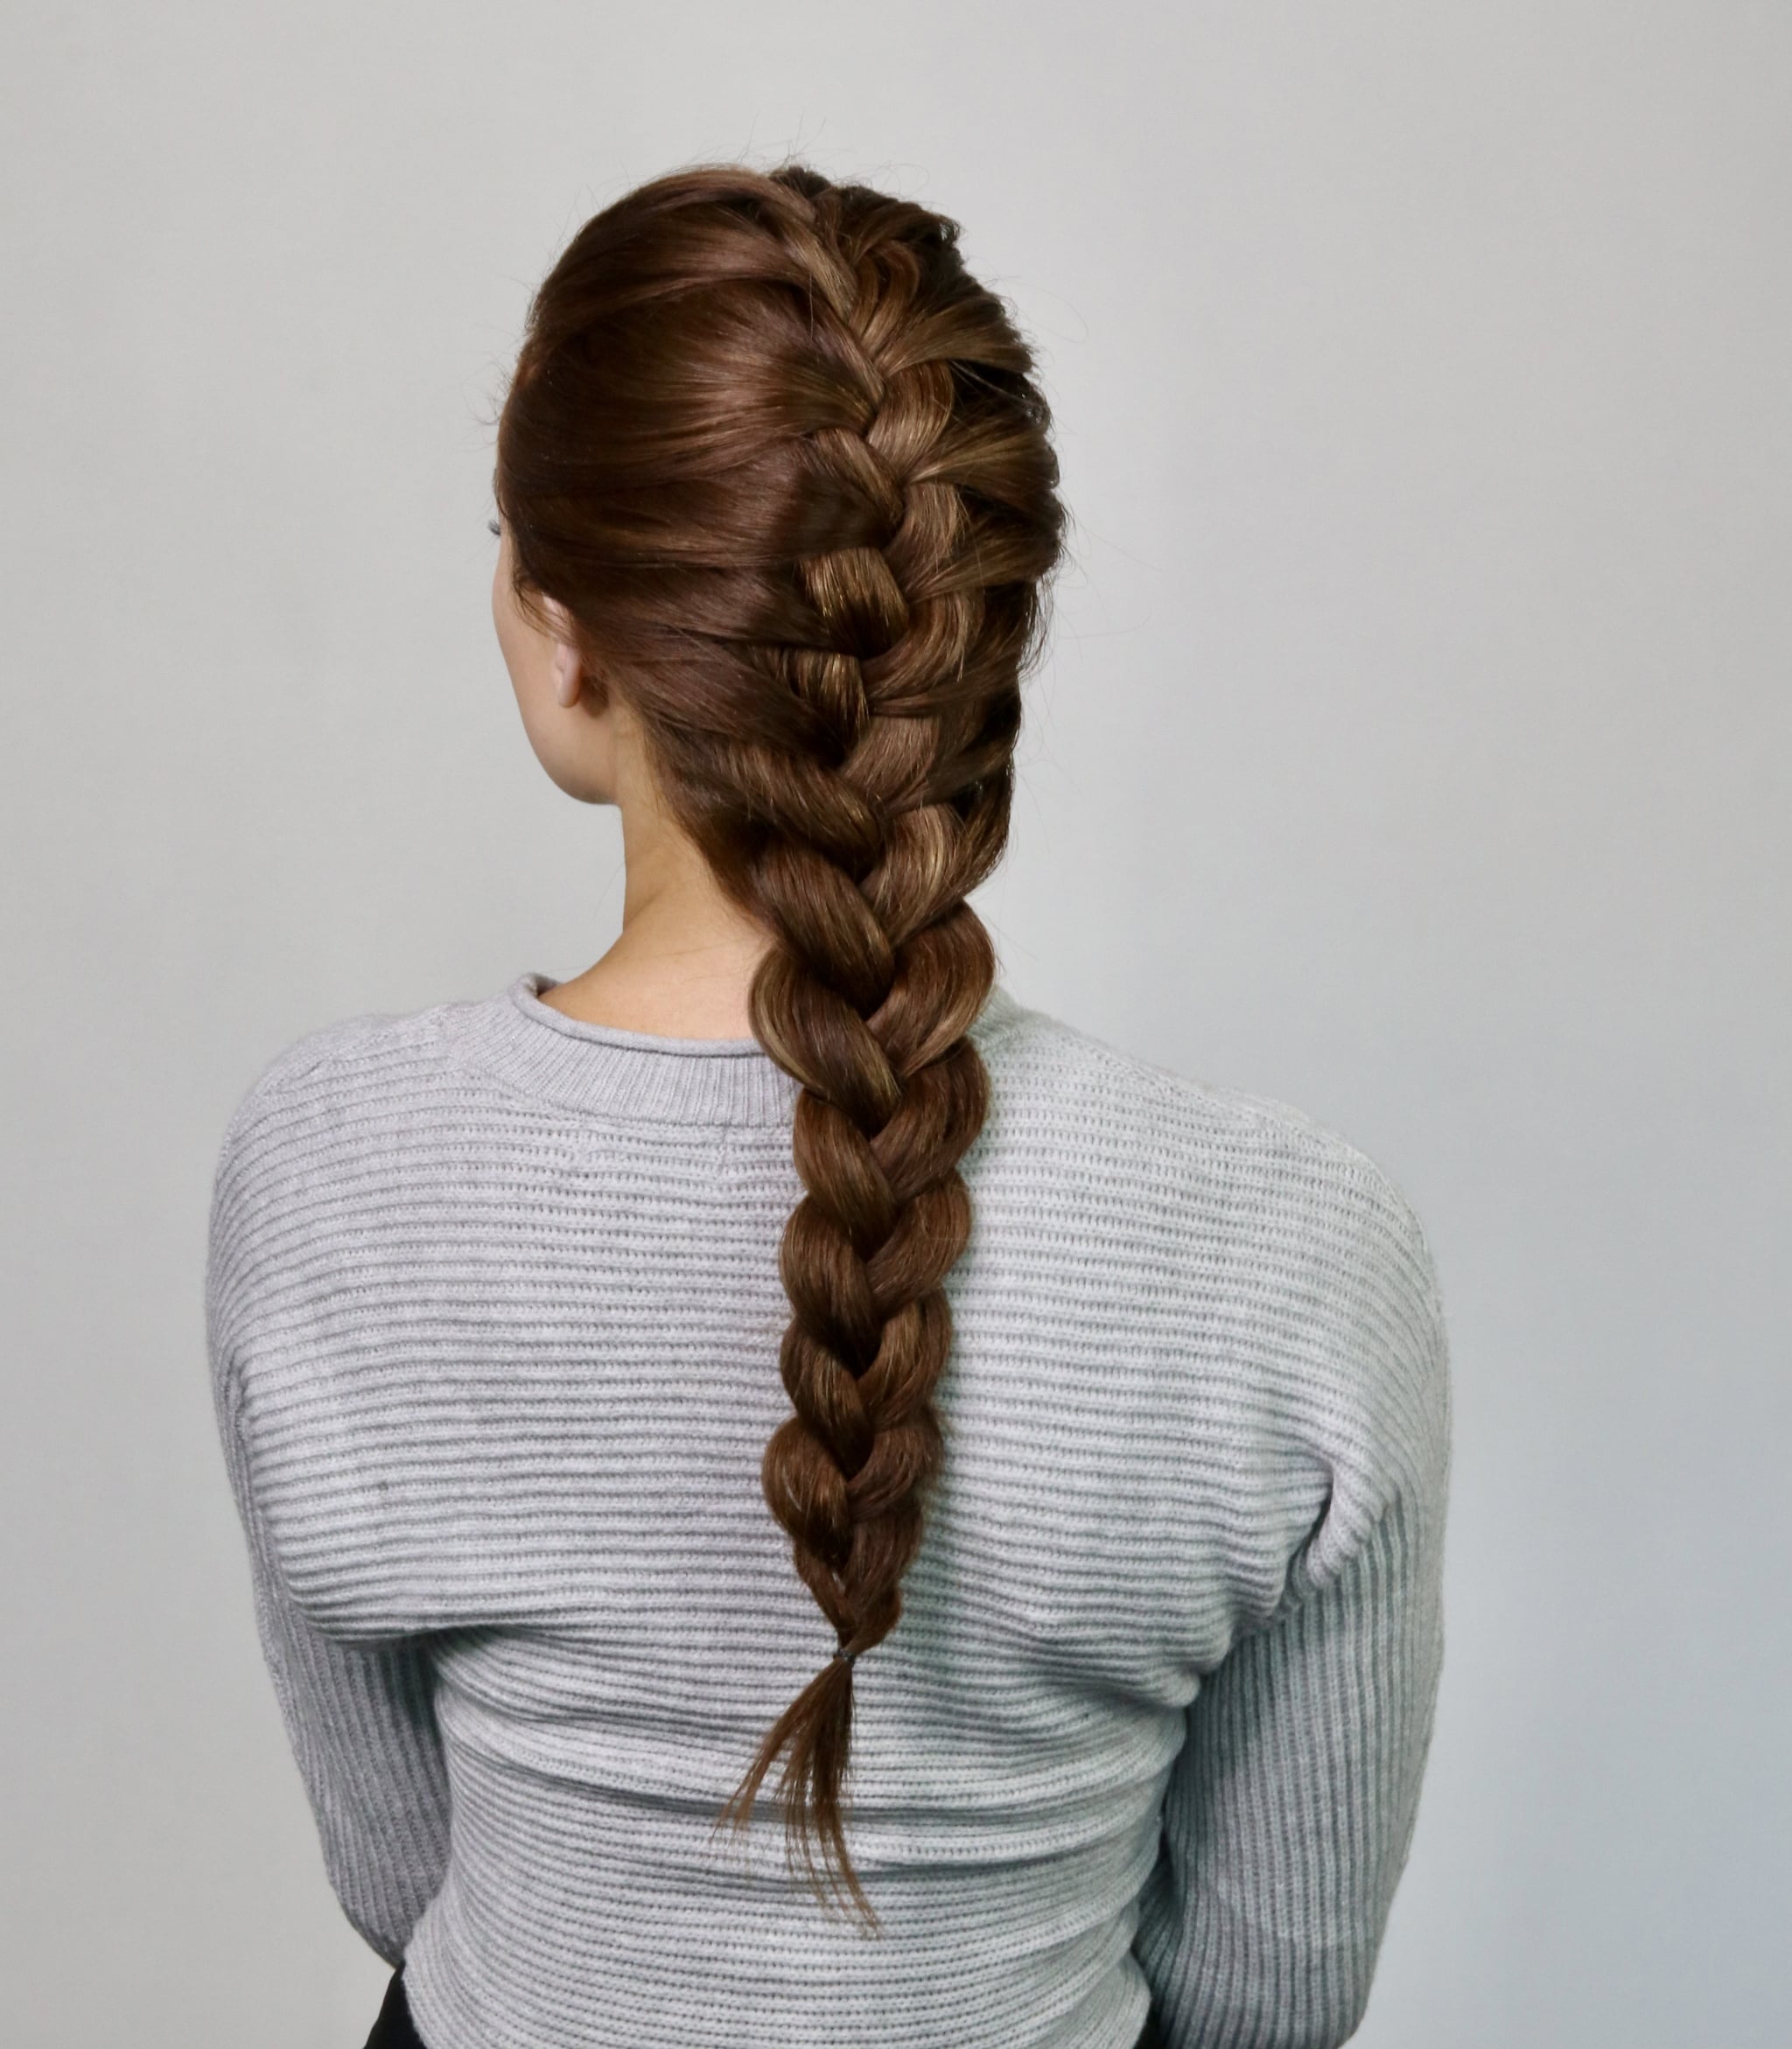 How to French Braid Your Hair: Step-by-Step Tutorial